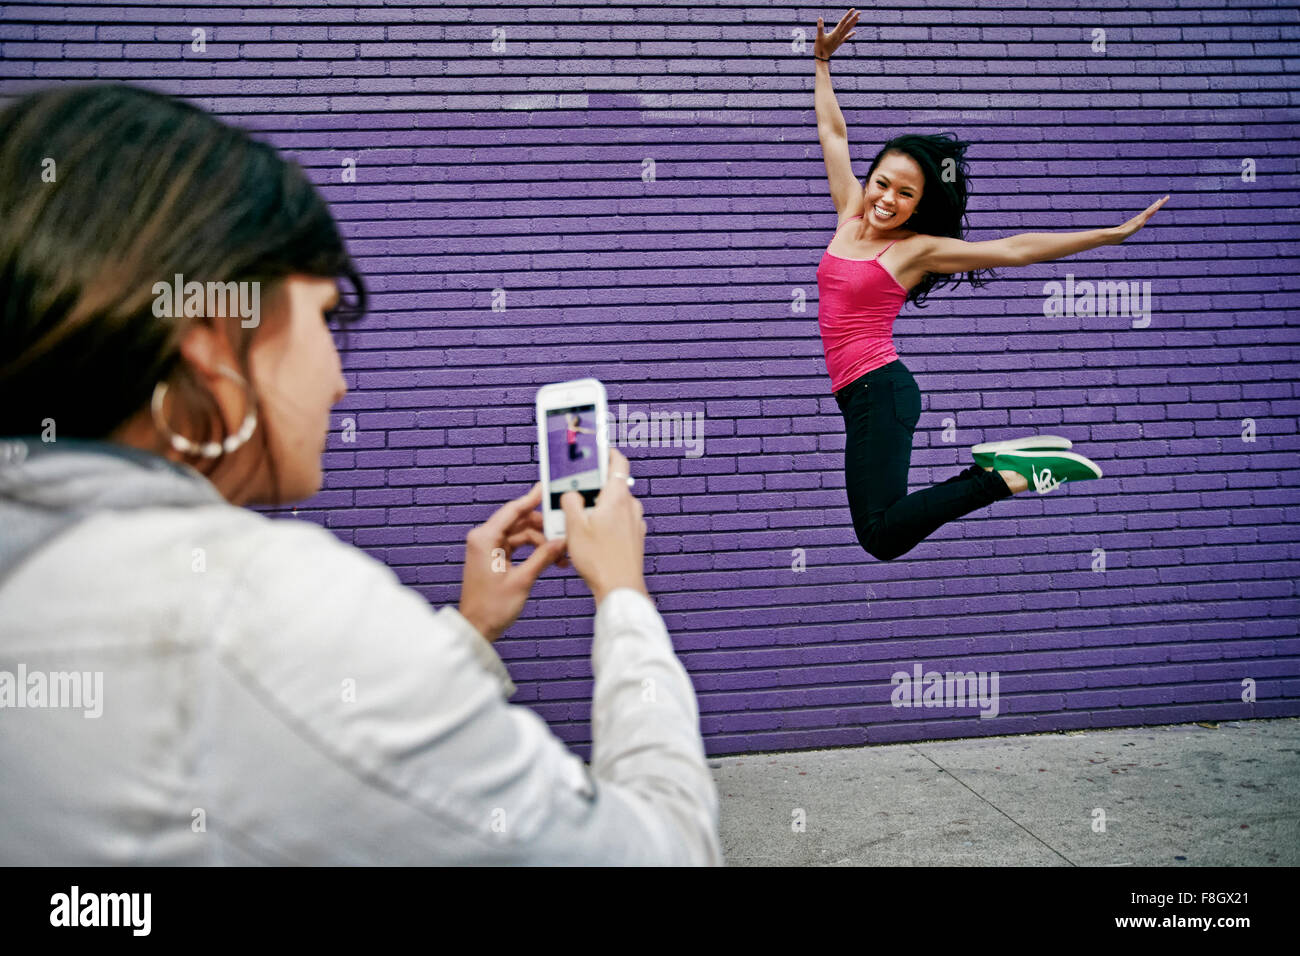 Woman photographing friend jumping for joy Stock Photo